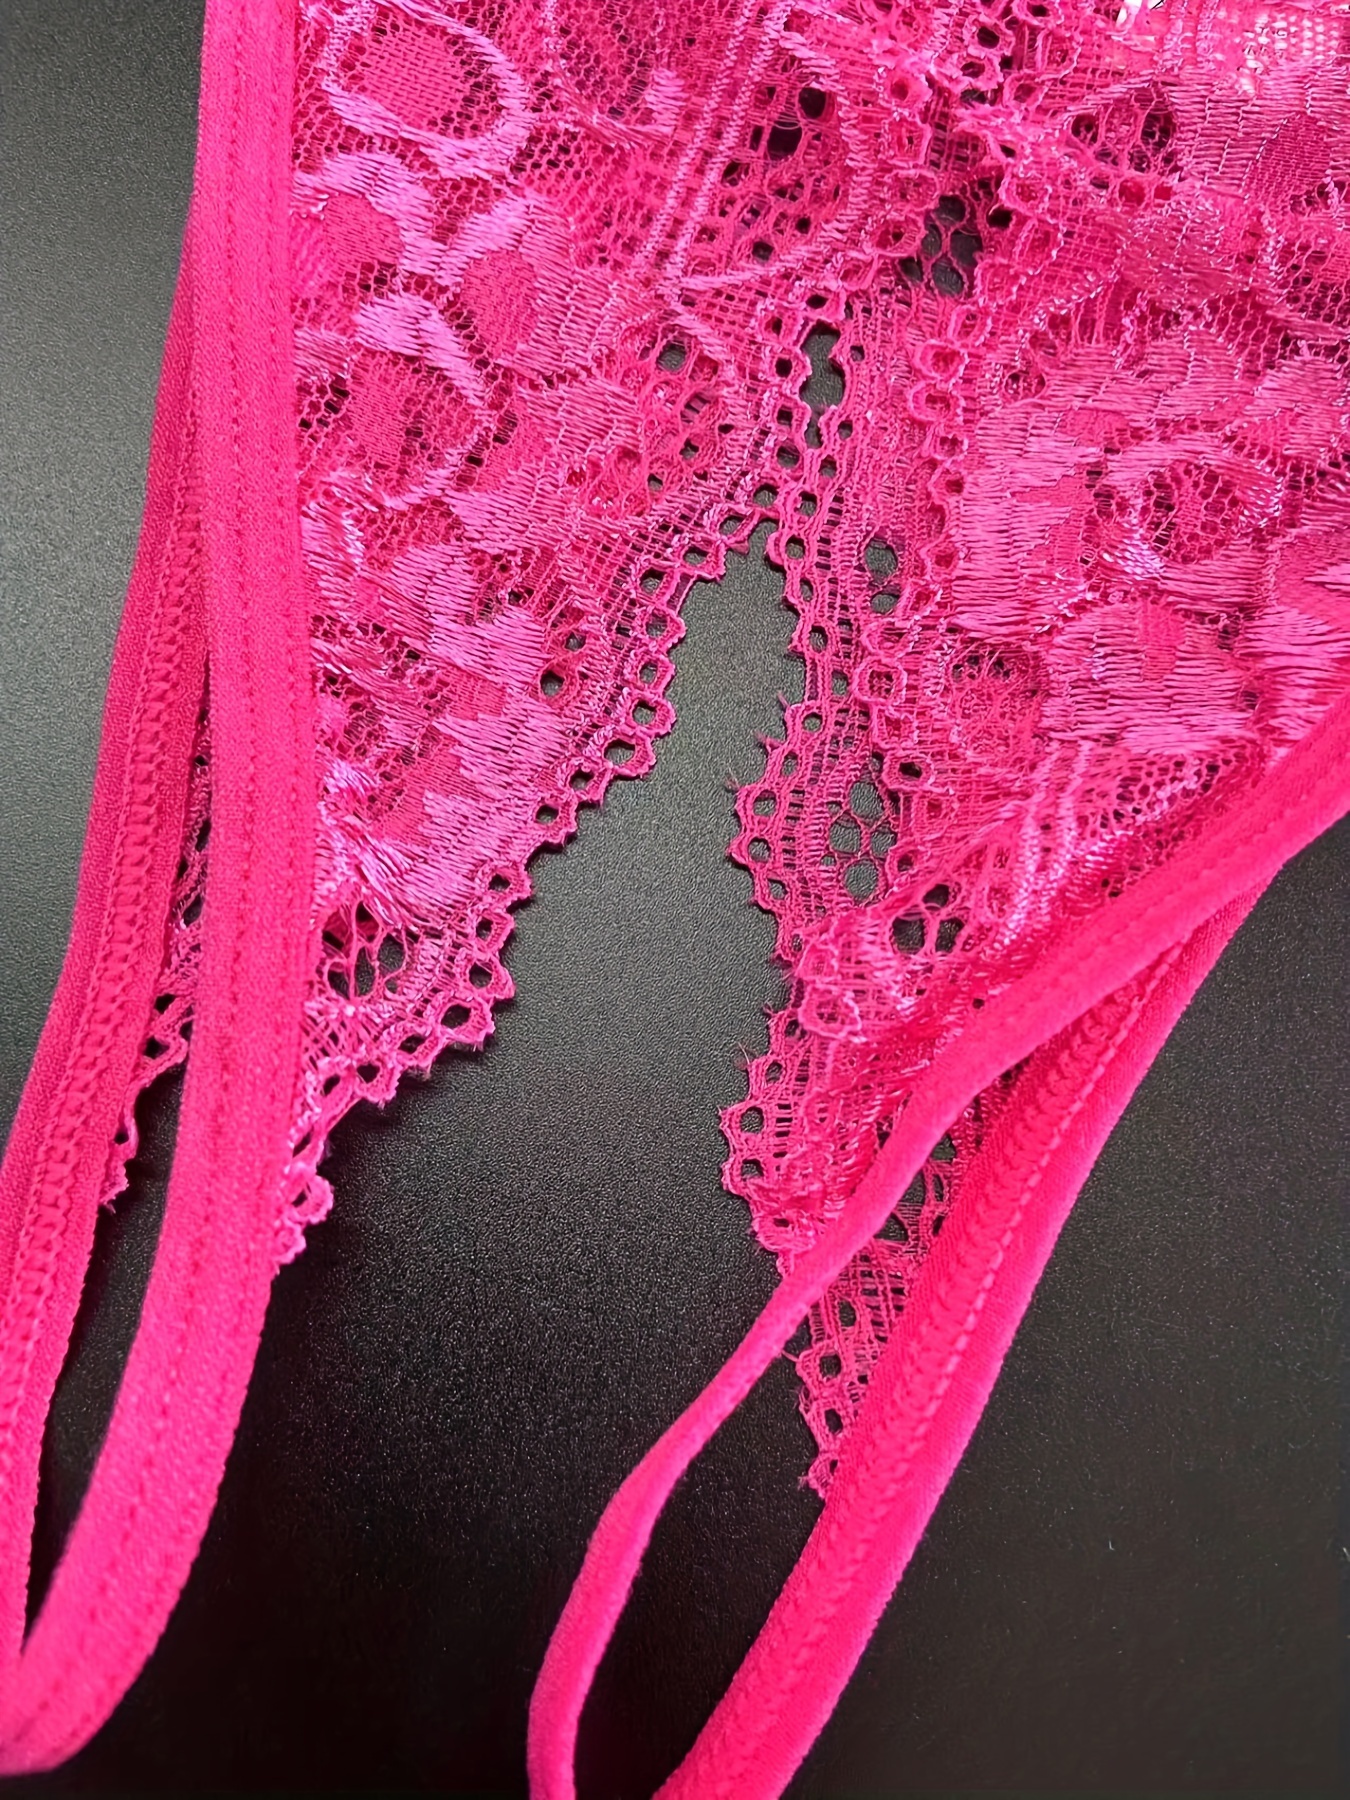 Womens Sexy Lingerie Open Crotch Panties Lace Underwear Crotchless